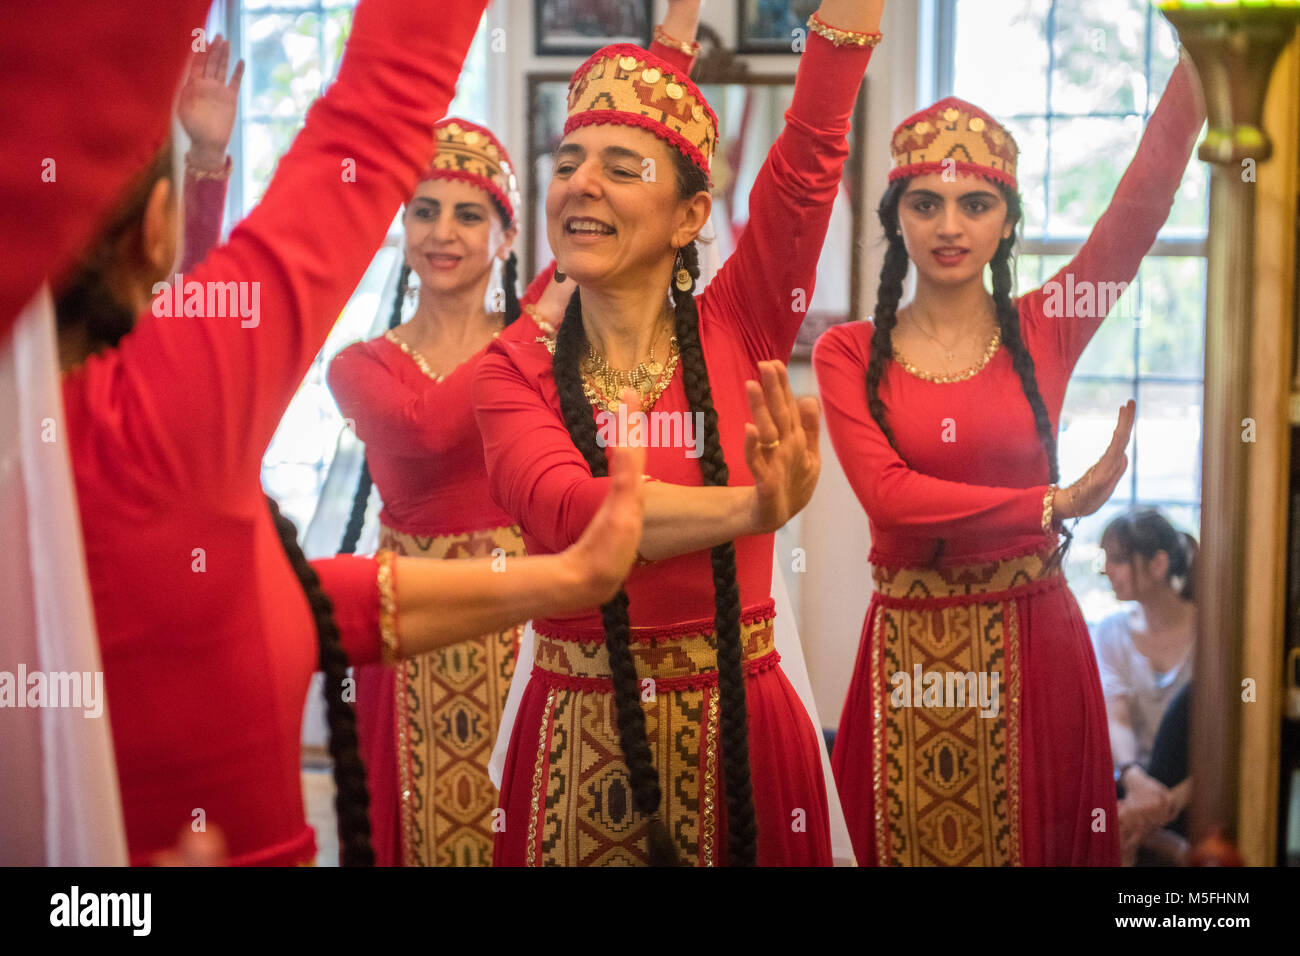 View in mirror of older Armenian woman instructing dancers on movement behind her, Washington Grove, Maryland. Stock Photo